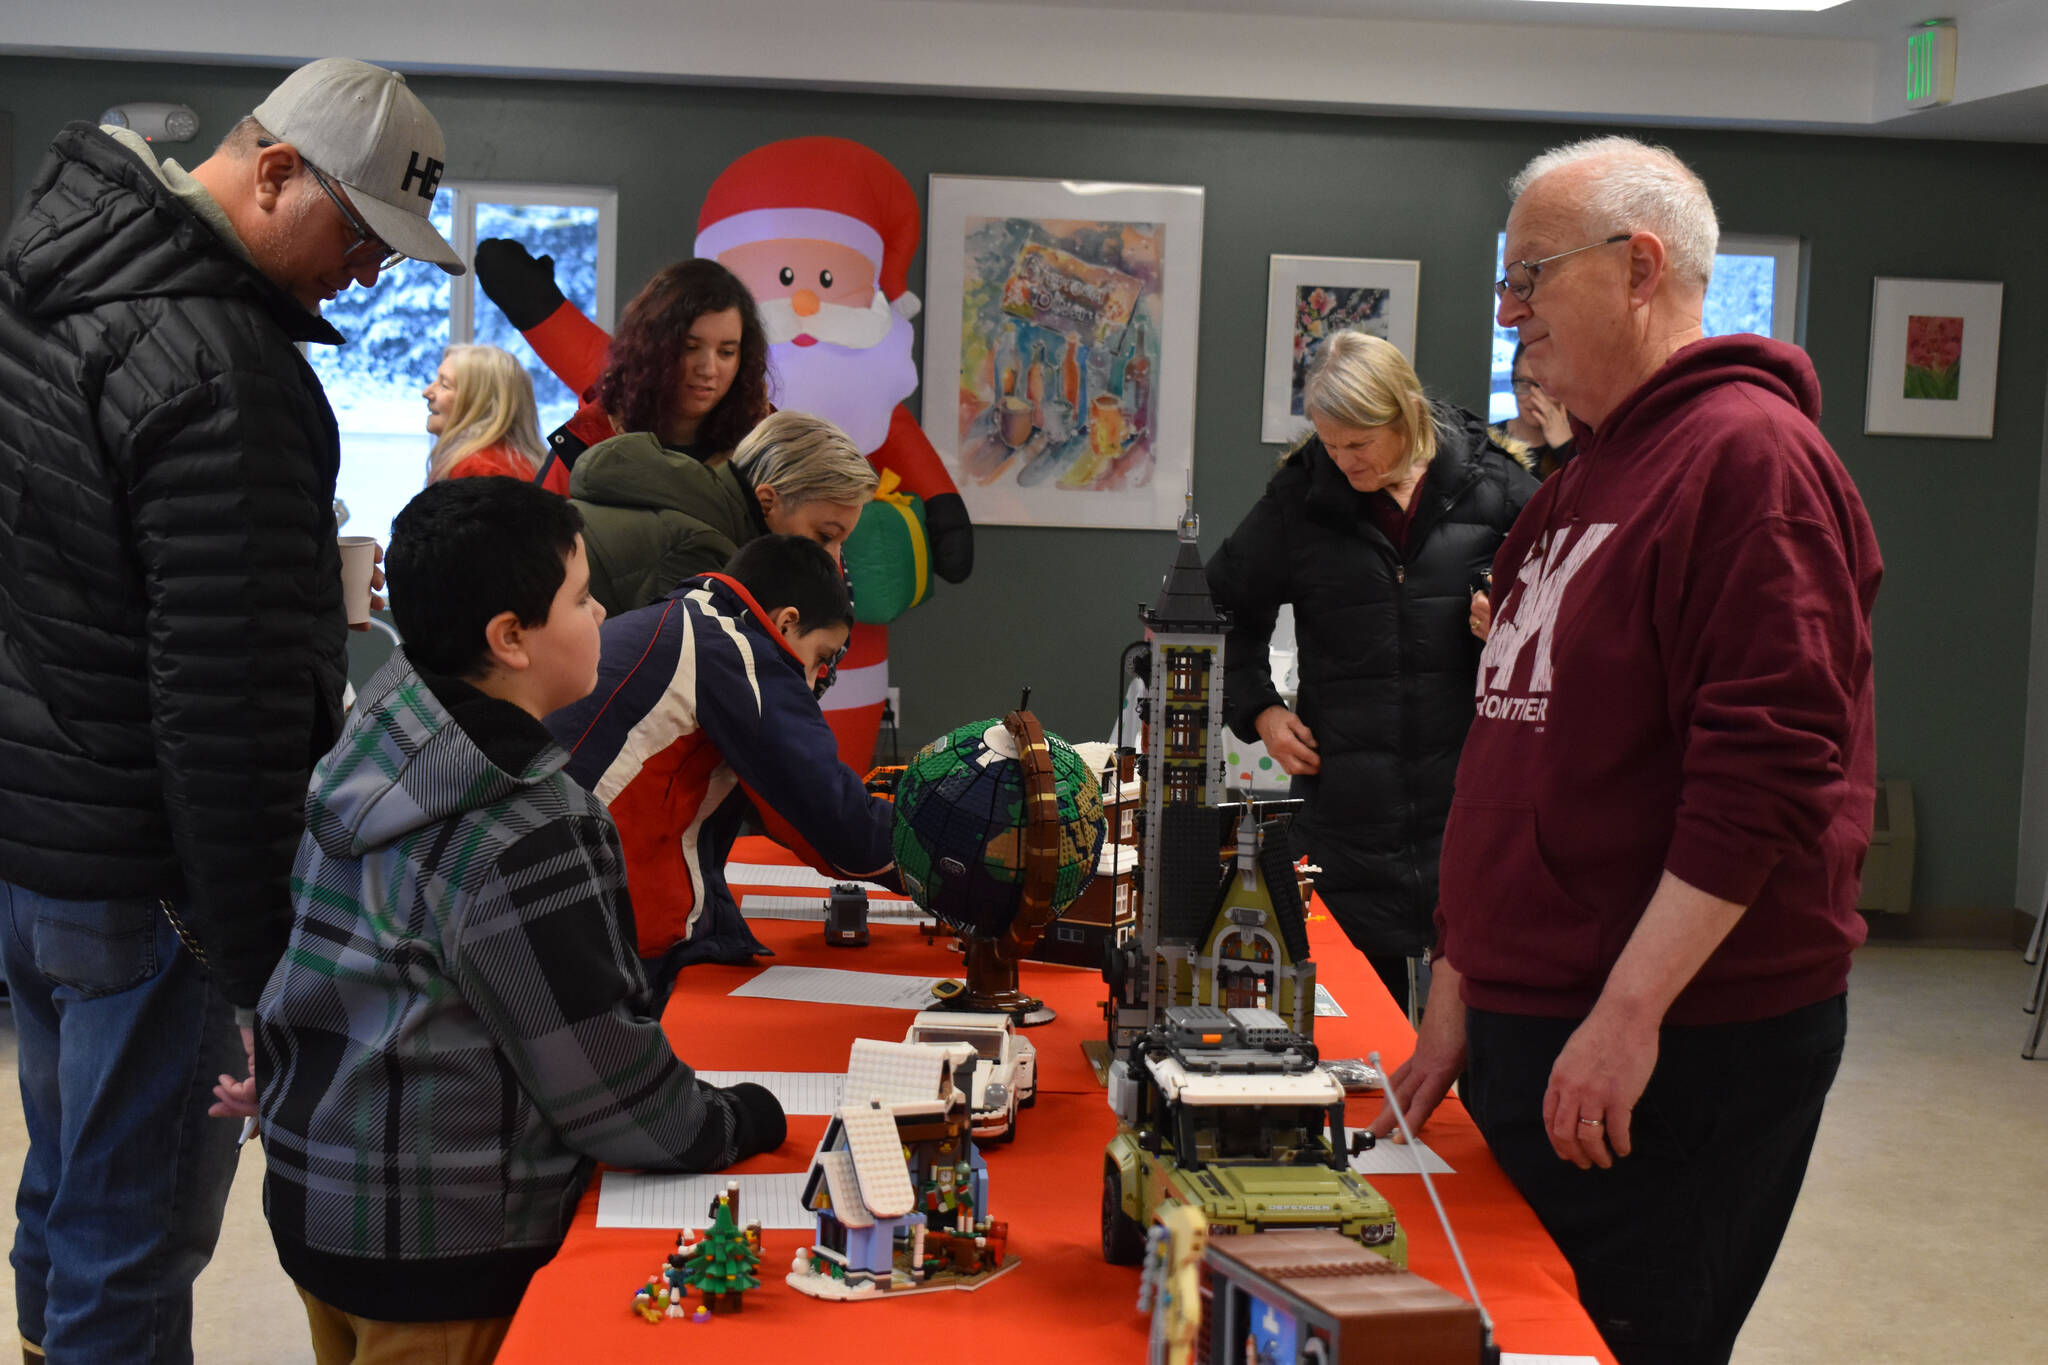 Greg Meyer speaks to a potential buyer of the Lego sets he built as they are put on auction during Bark, Block and Bowl on Saturday, Dec. 10, 2022, at the Kenai Peninsula Food Bank in Soldotna, Alaska. (Jake Dye/Peninsula Clarion)